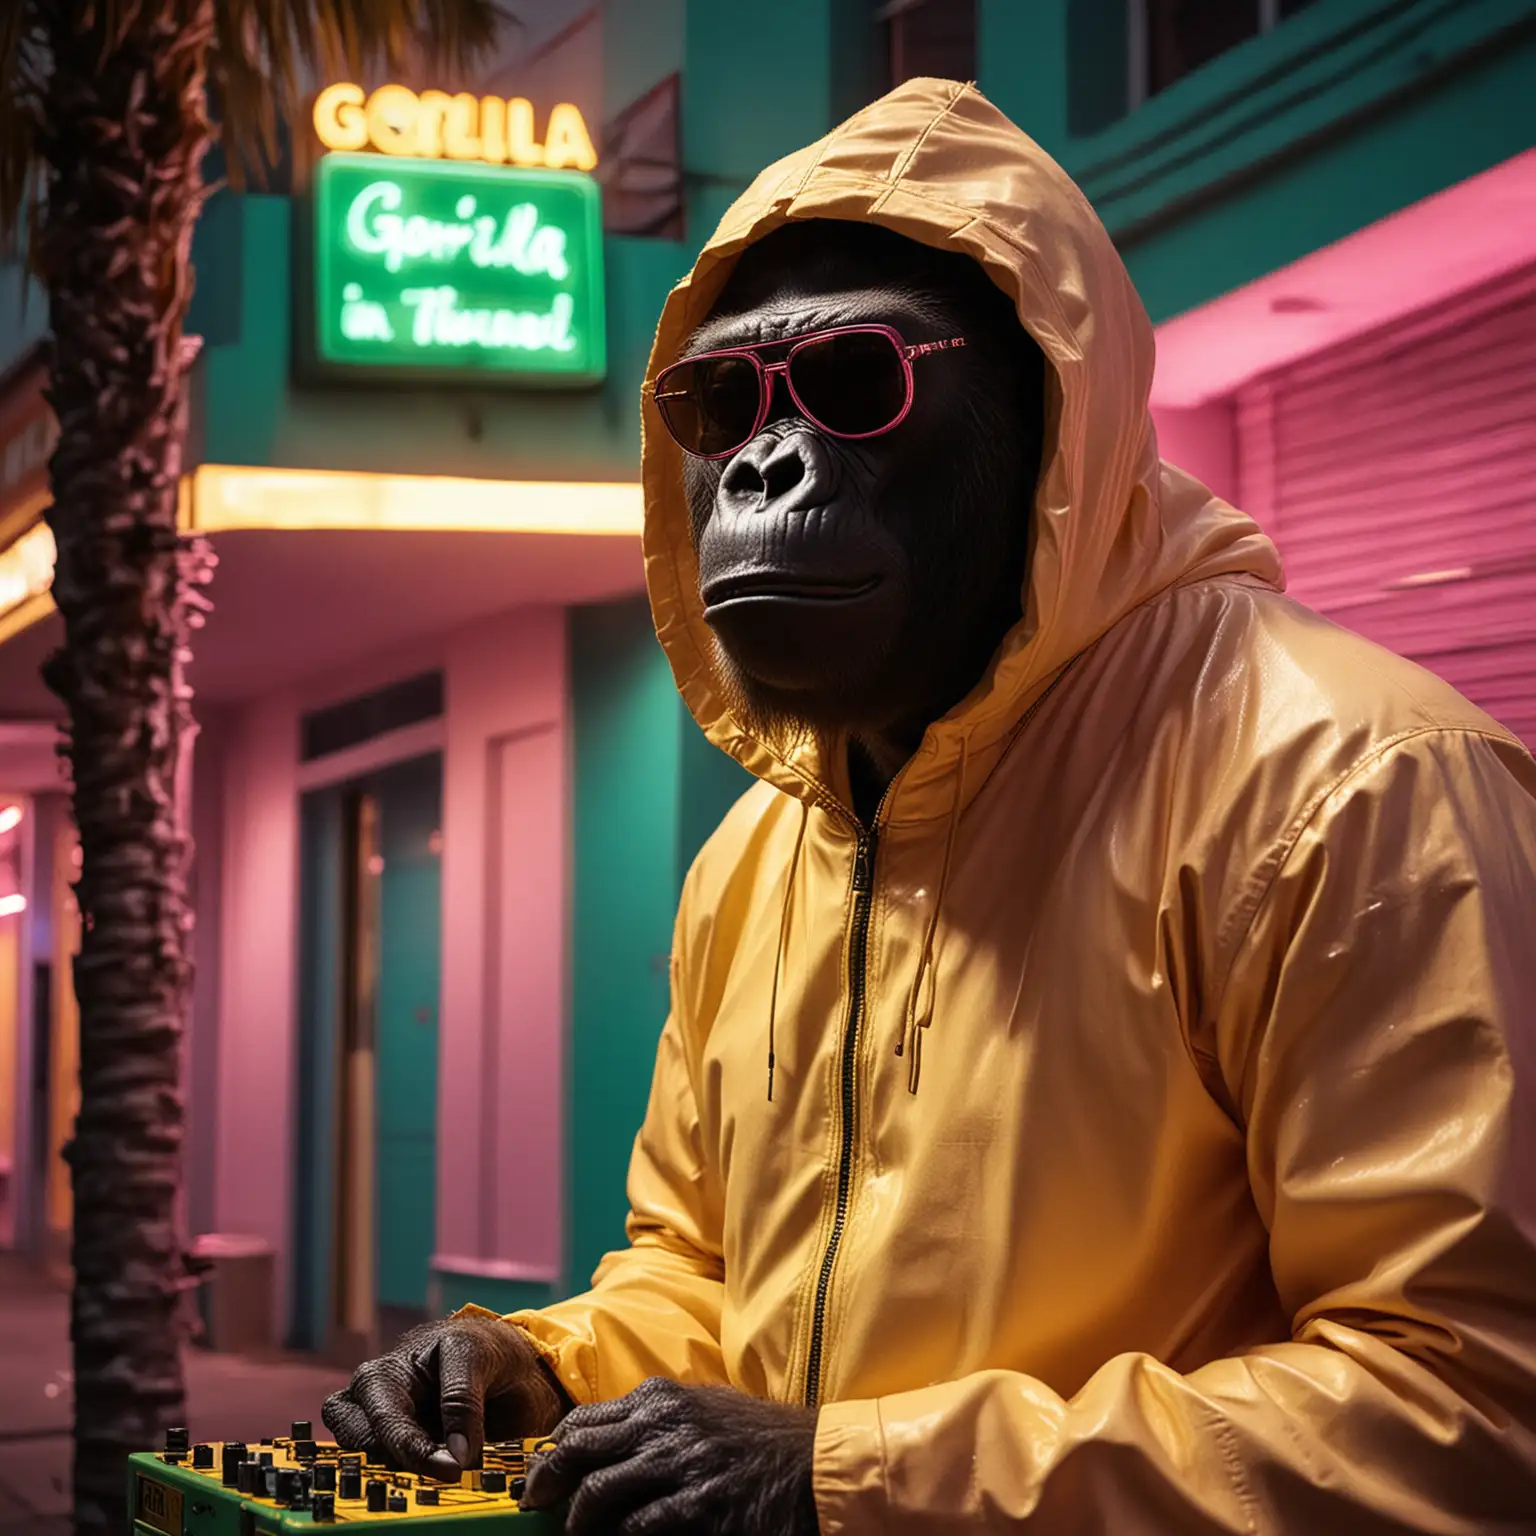 The gorilla is in Miami, it's night, and there's art deco architecture with green and pink neon lights illuminating the area. The gorilla wears dark sunglasses and a YELLOW COLOR jumpsuit like the one in the Breaking Bad series. His head is covered by the yellow hood.
he is playing an african percussion instrument. Close up. cinematic.